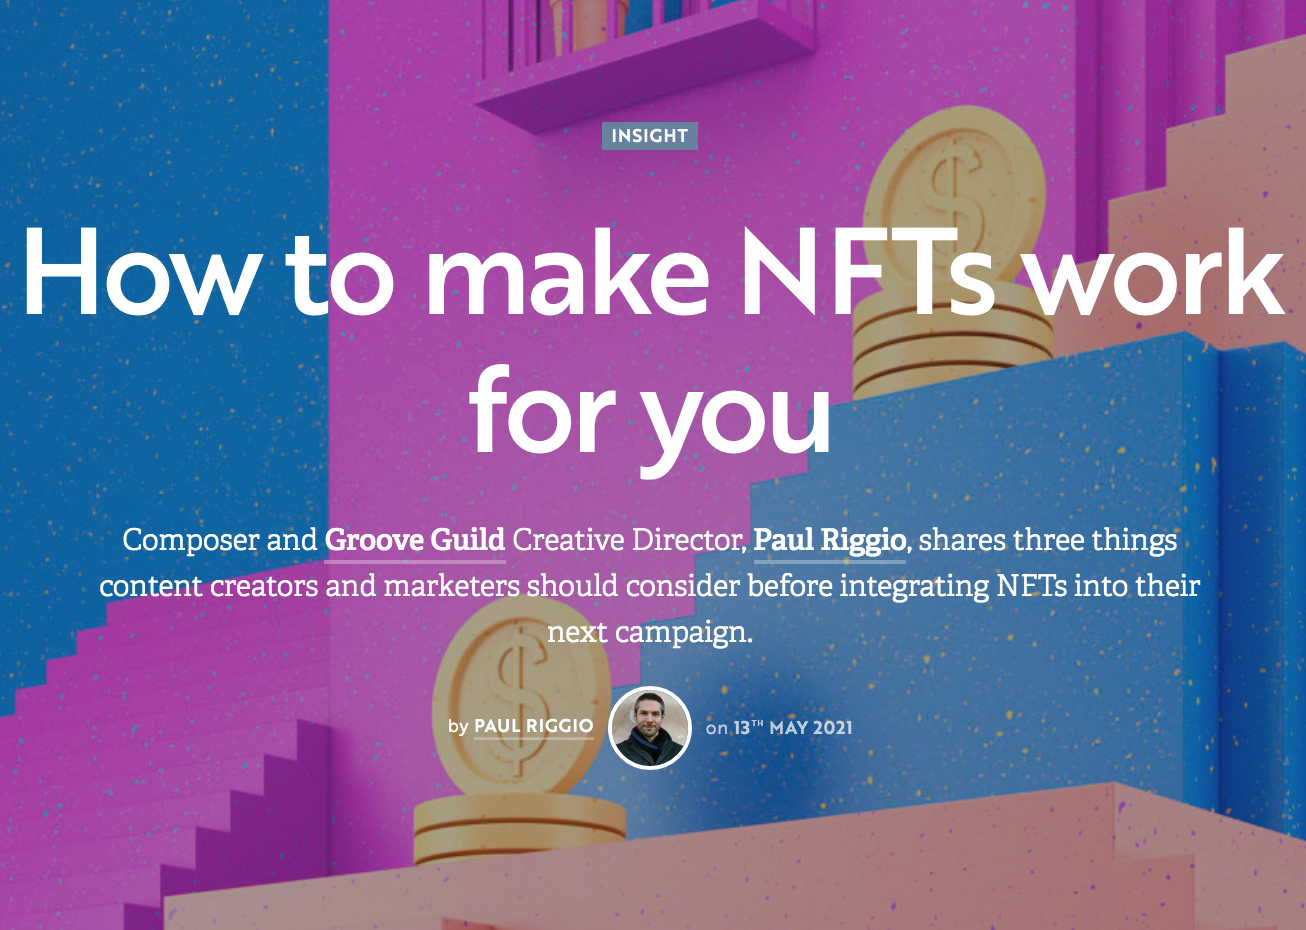 How to make NFTs work for you